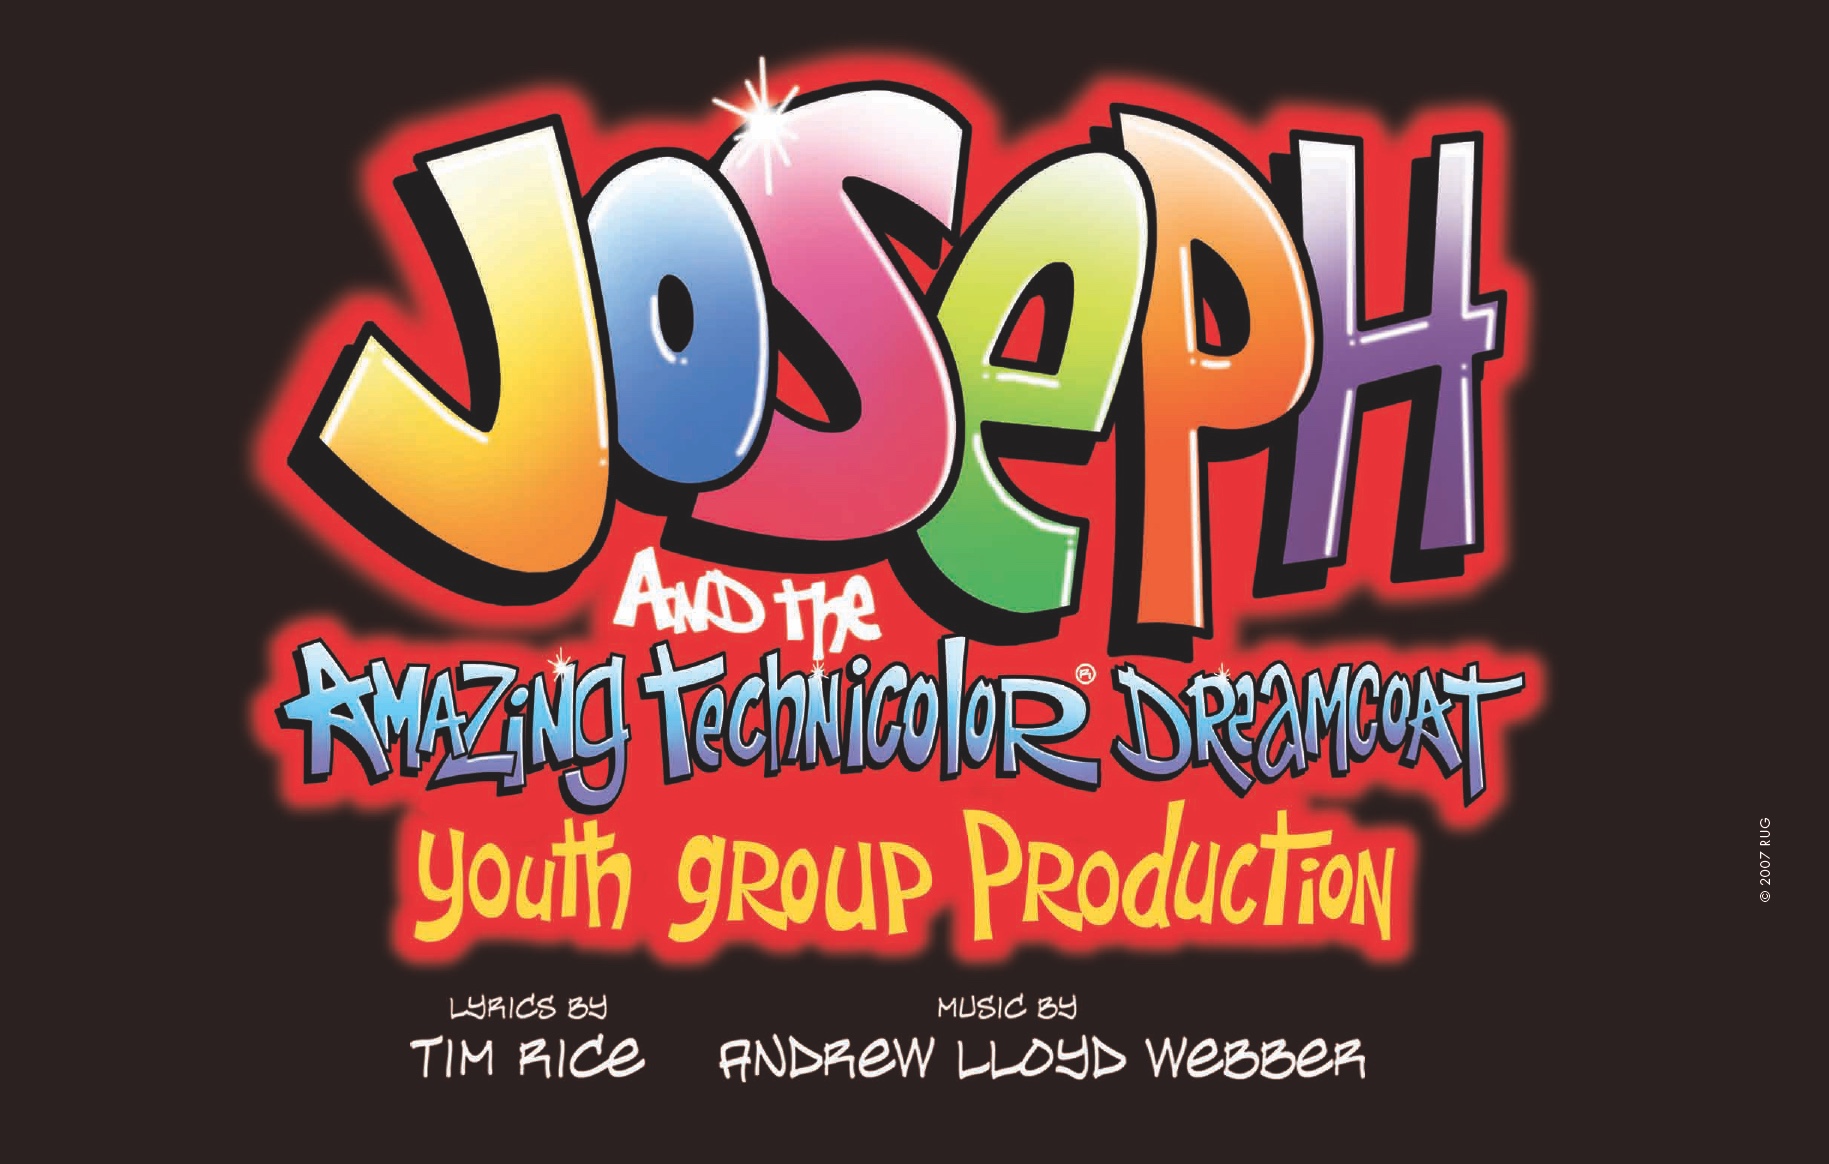 Joseph & The Amazing Technicolor Dreamcoat - A Herne Bay Youth Theatre Production